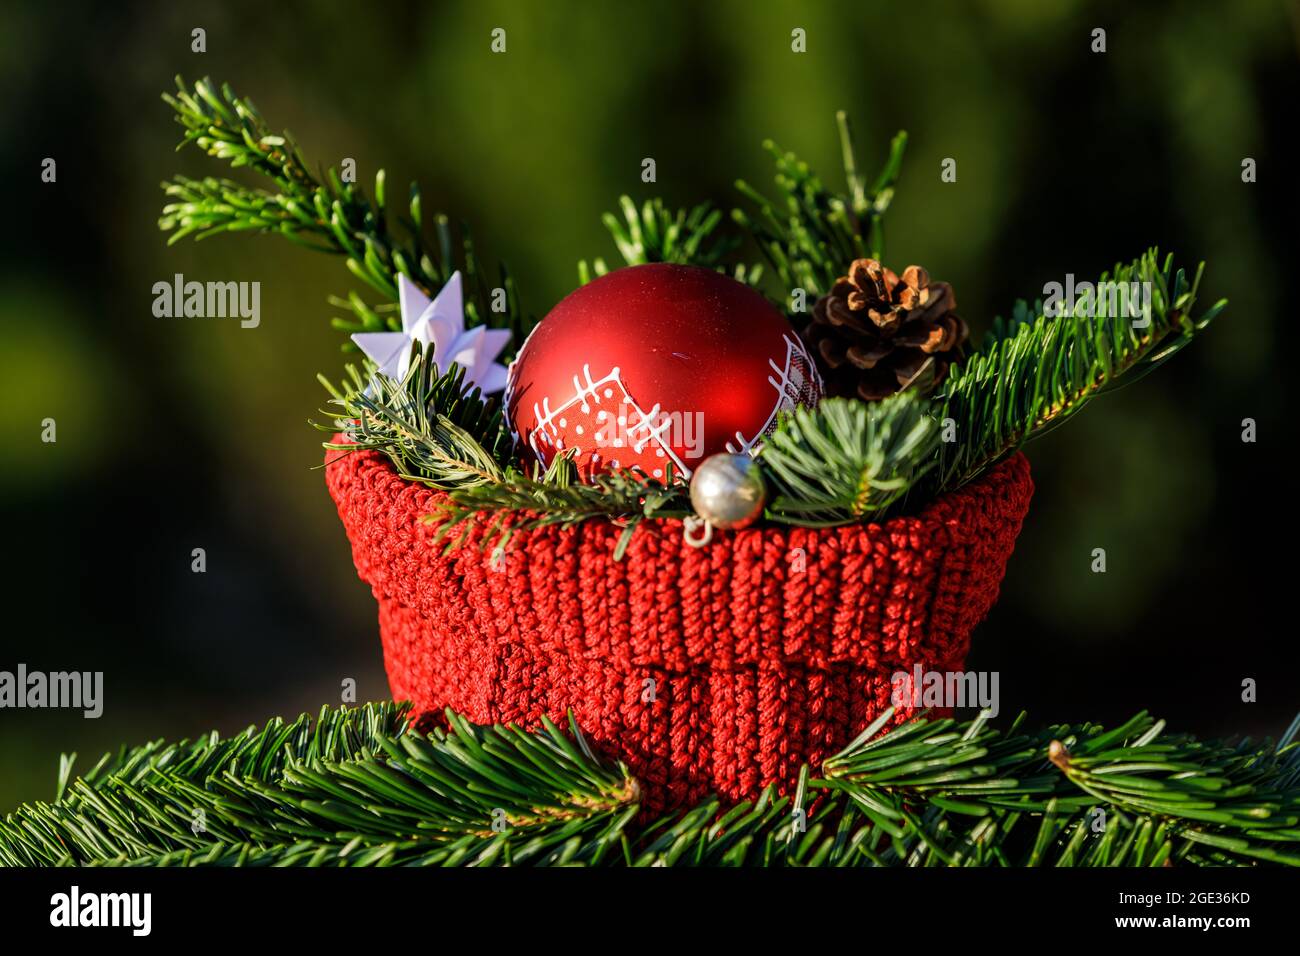 A red crocheted basket with fir branches and a red Christmas tree ball against a green background Stock Photo